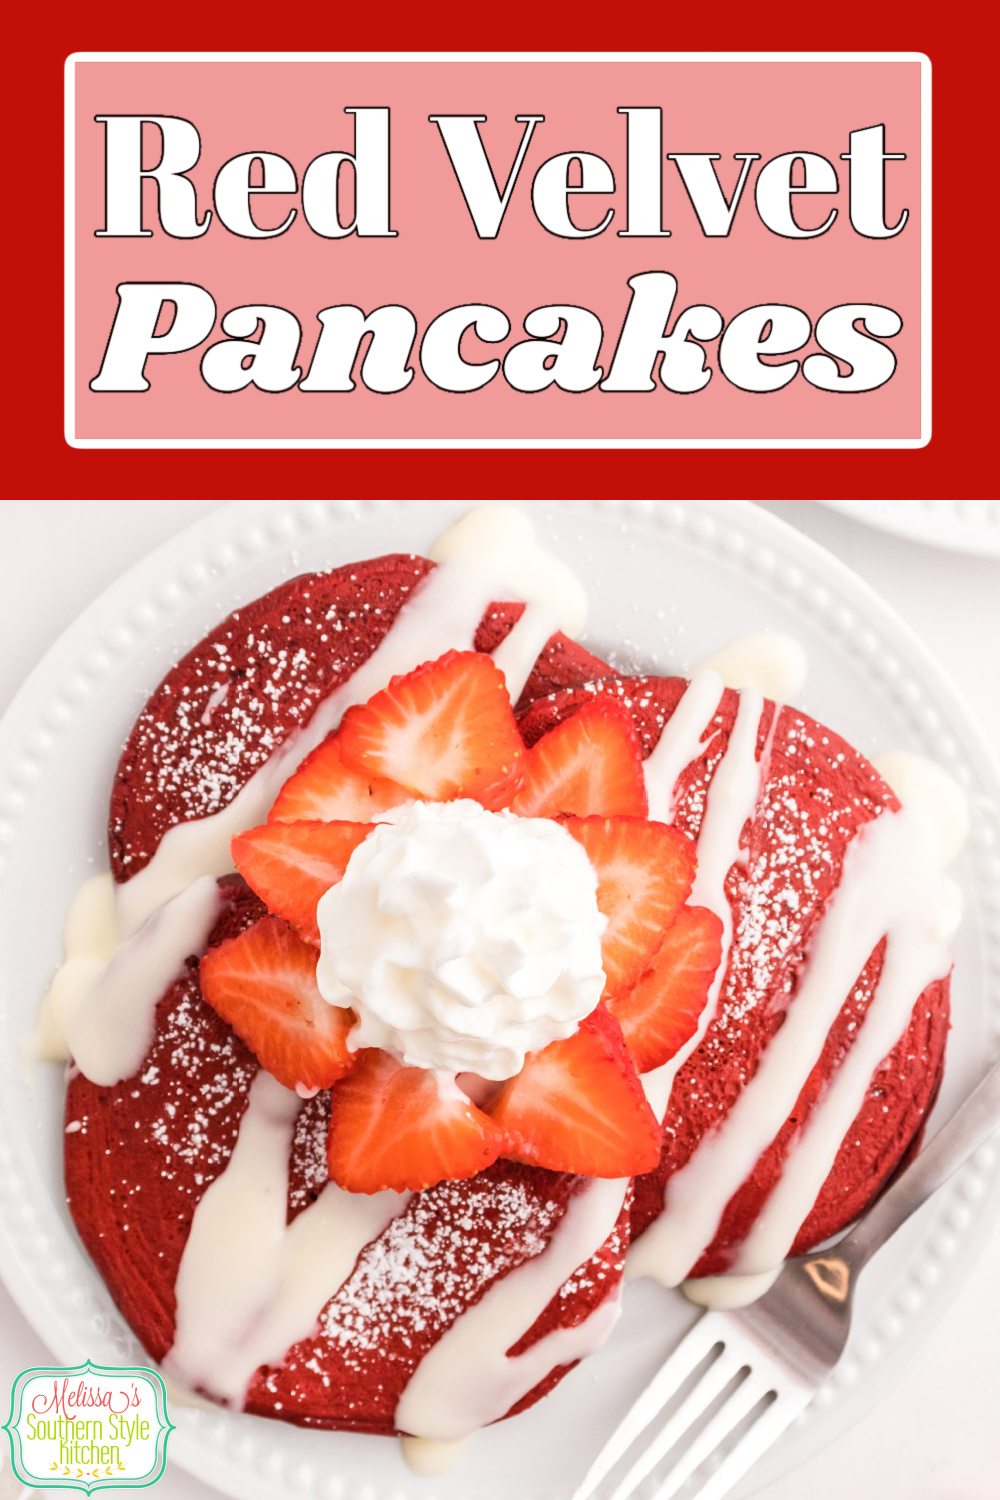 Everyone will love this Red Velvet Pancakes recipe that includes a decadent homemade cream cheese drizzle for the crowning touch #redvelvetrecipes #redvelvetpancakes #pancakerecipes #easypancakerecipe #redvelvetcake #southernredvelvetcake #ihop #creamcheeseglaze #chocolatepancakes #chocolaterecipes #mothersdaybrunch #valentinesday #fathersdaybrunch via @melissasssk